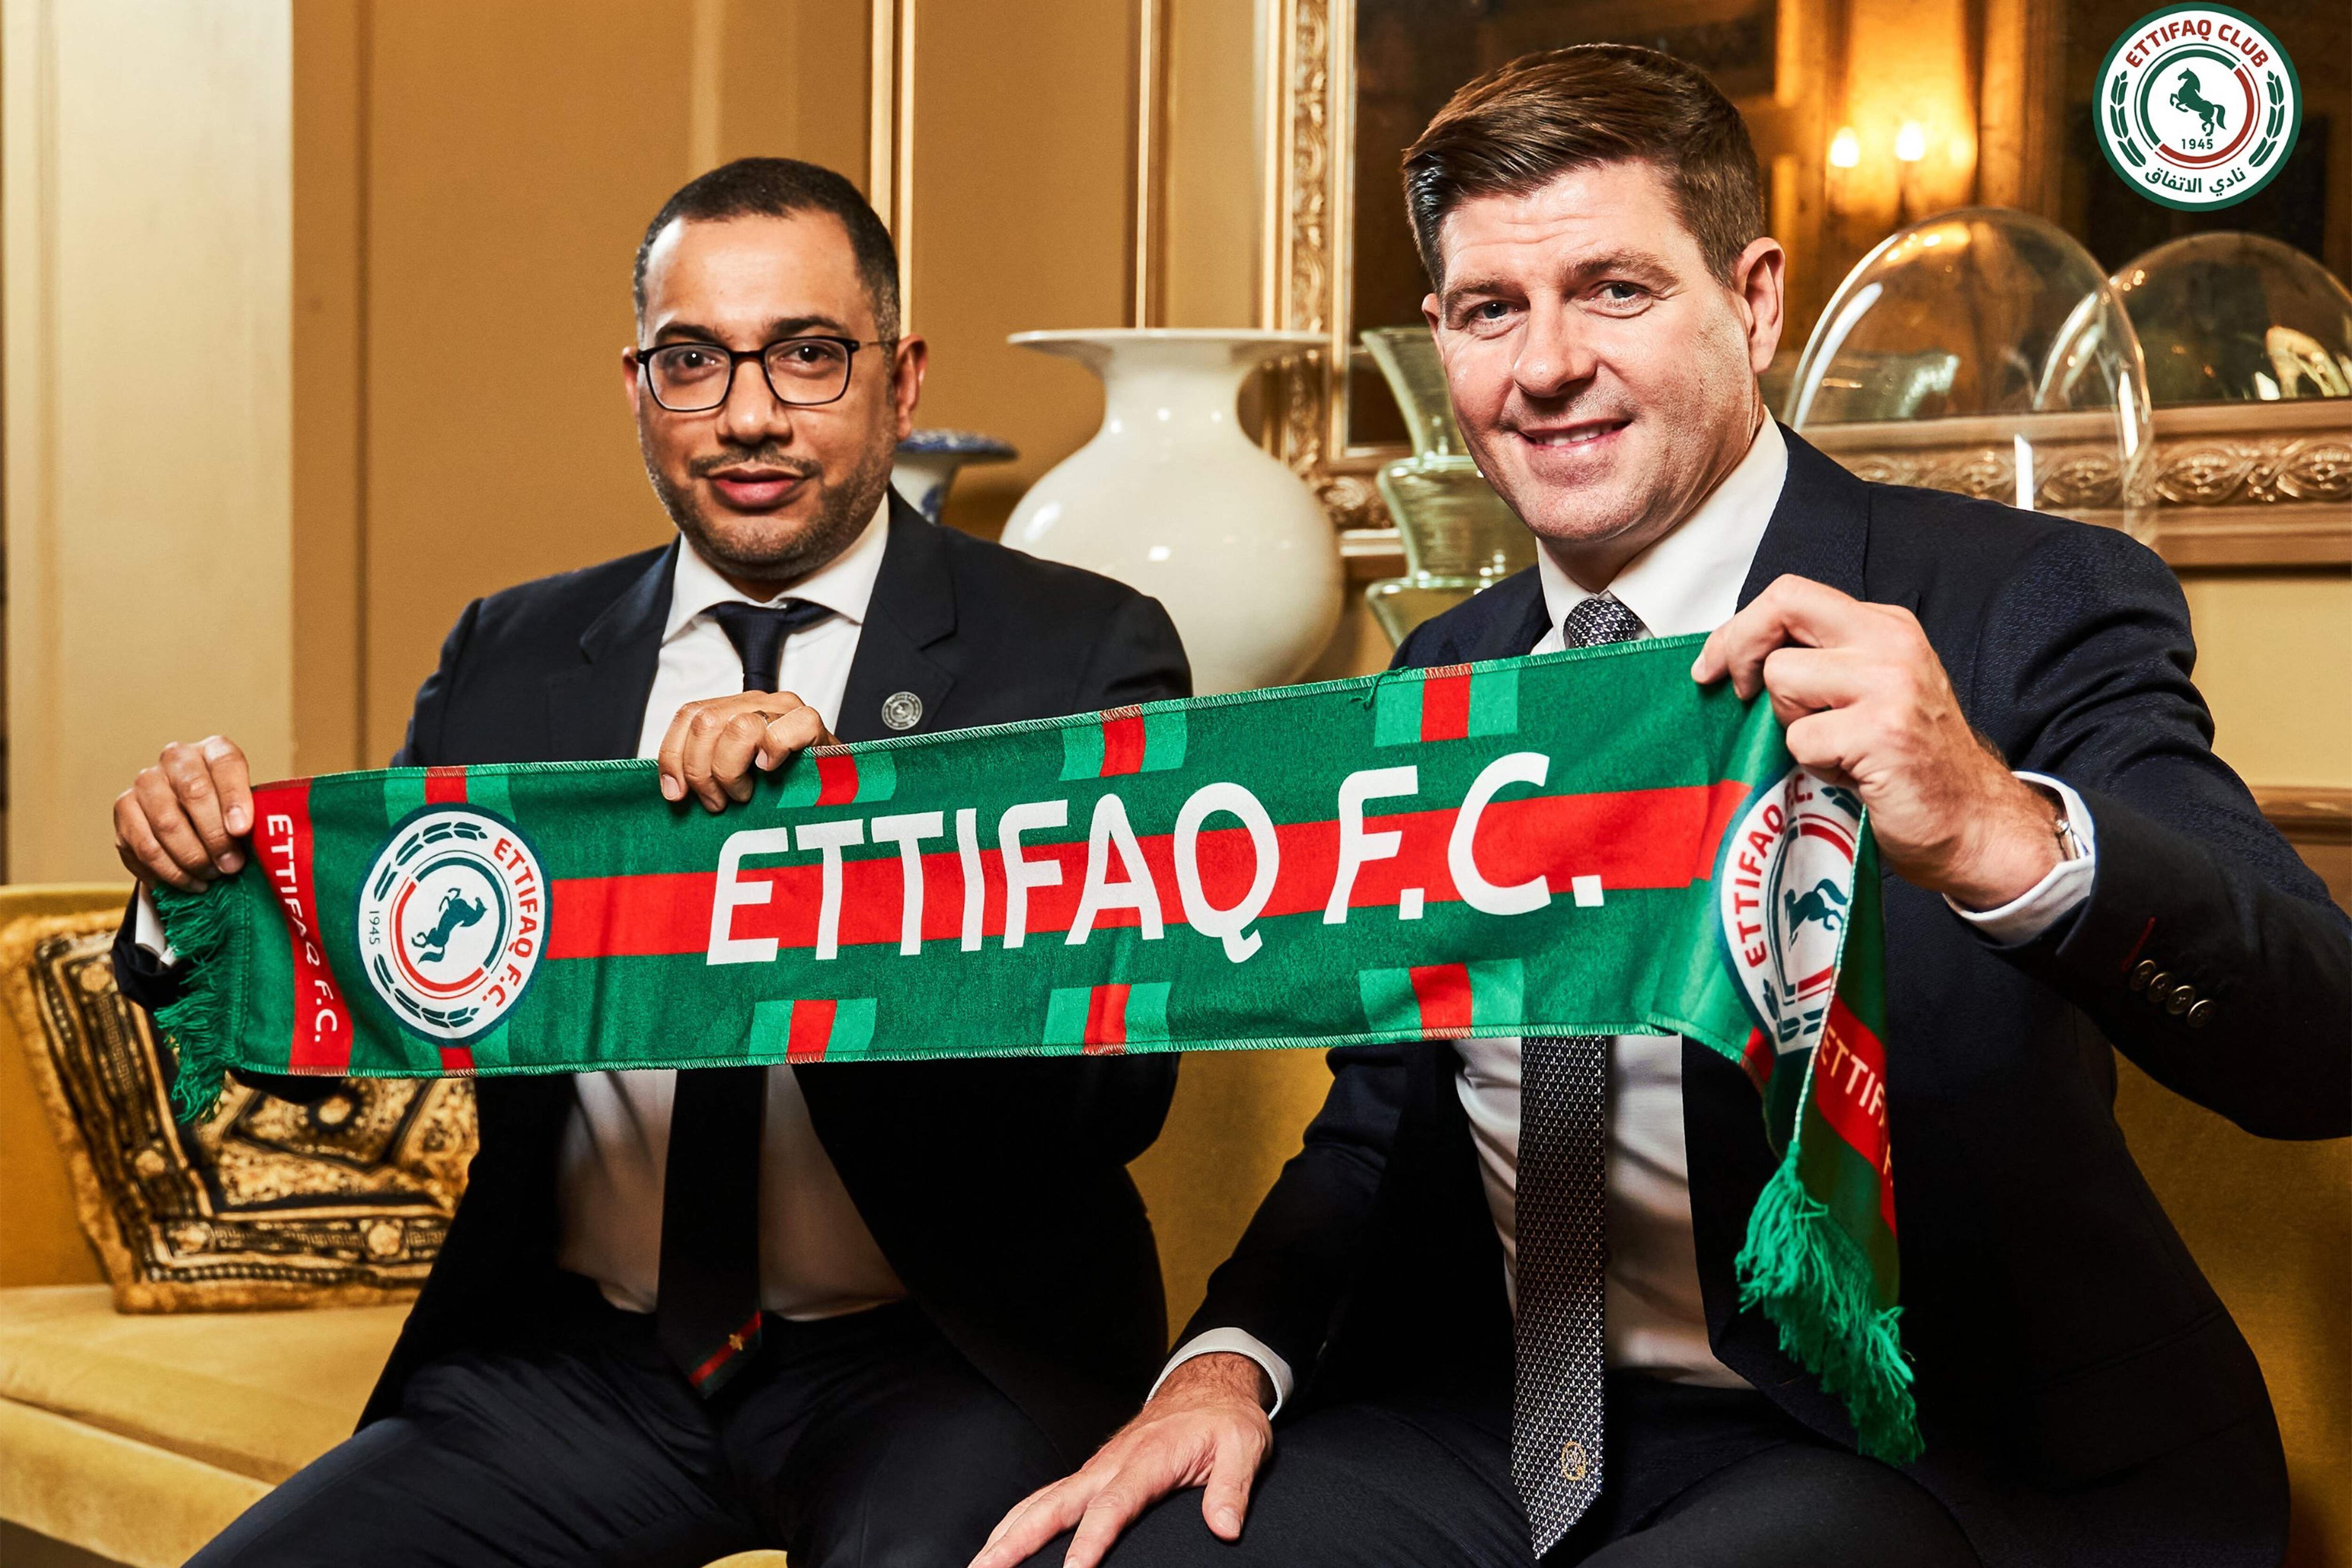 This handout picture released by Saudi Arabia's al-Ettifaq football club on July 3, 2023 shows Ettifaq's new English manager Steven Gerrard (R) with the club's President Khaled al-Debel after signing with them in London. (Photo by Al Ettifaq Football Club / AFP) / == RESTRICTED TO EDITORIAL USE - MANDATORY CREDIT "AFP PHOTO / HO /AL ETTIFAQ FOOTBALL CLUB" - NO MARKETING NO ADVERTISING CAMPAIGNS - DISTRIBUTED AS A SERVICE TO CLIENTS ==